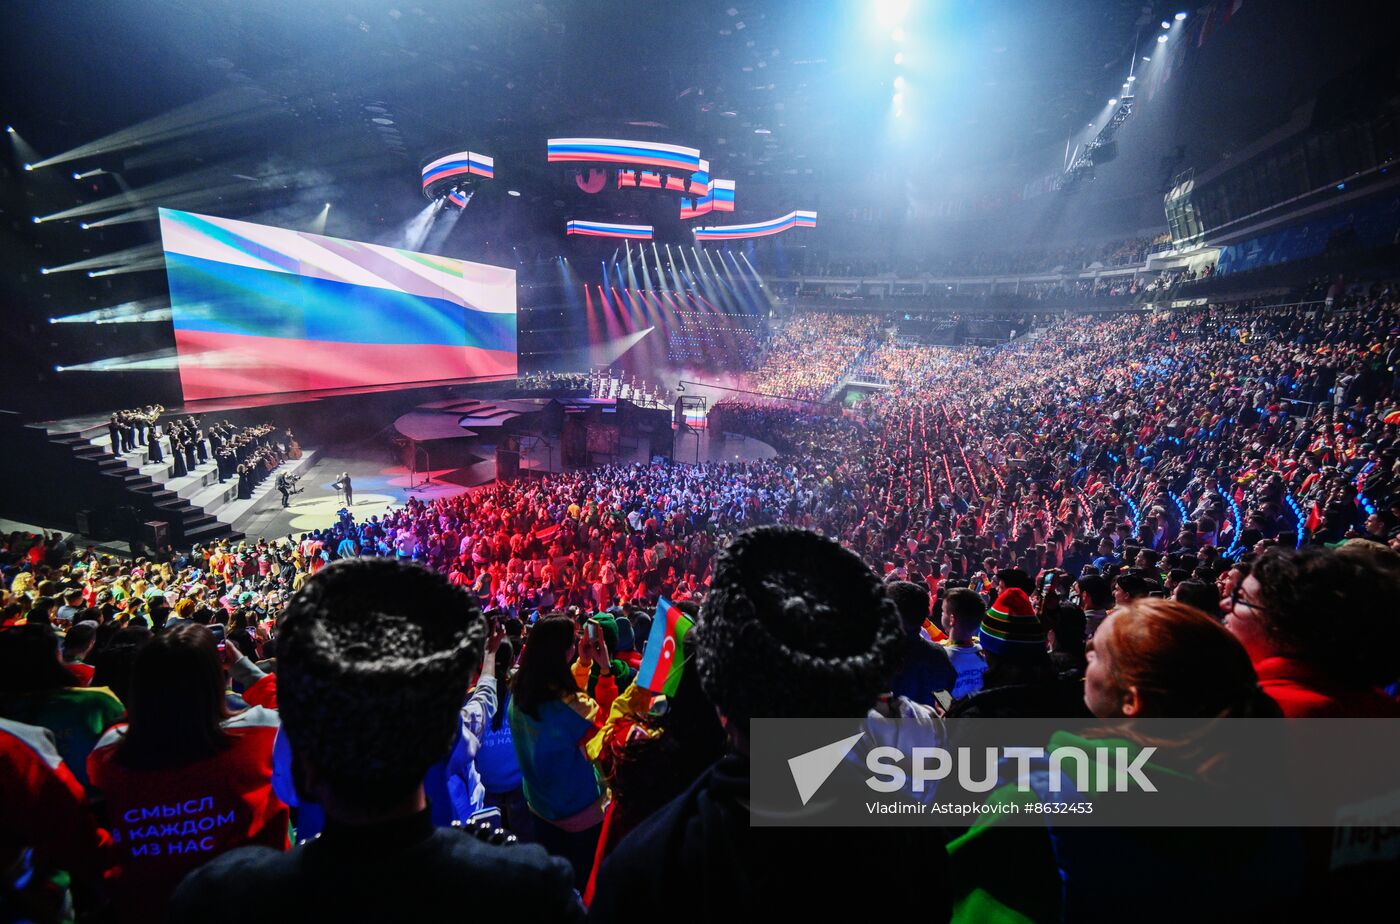 Russia World Youth Festival Opening